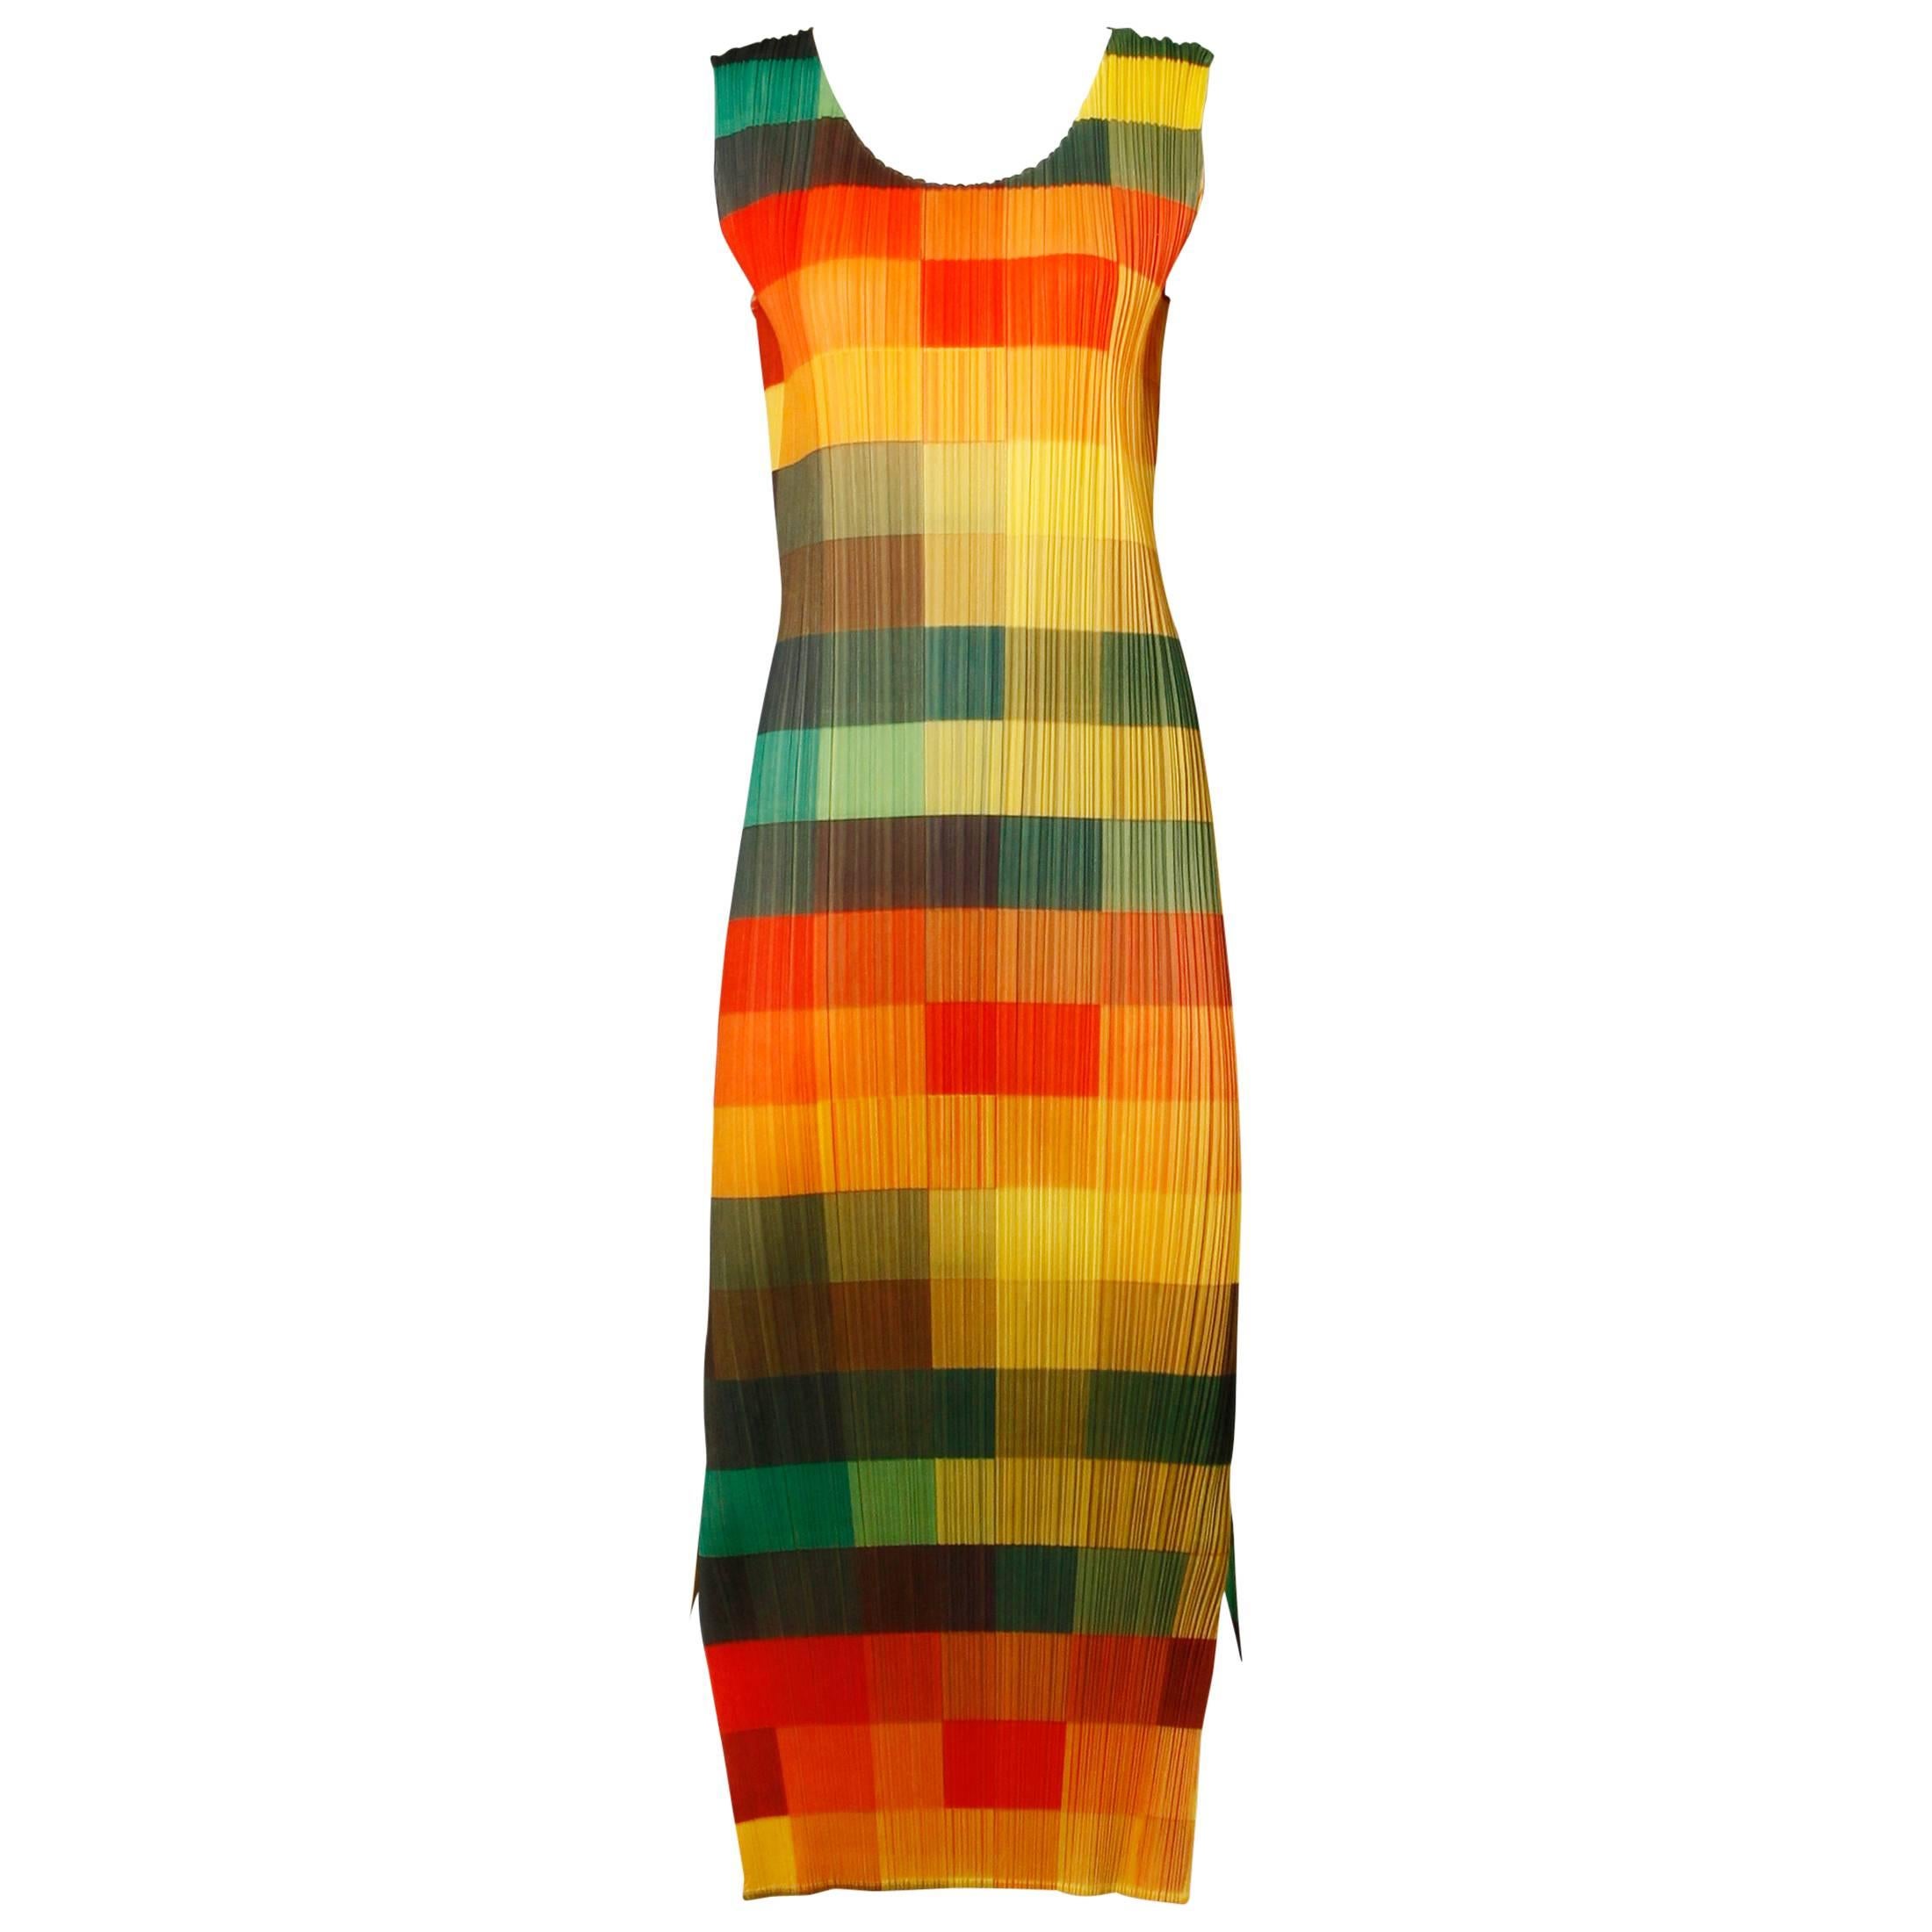 Issey Miyake Pleats Please Avant Garde Checkered Maxi Dress with Side Slits